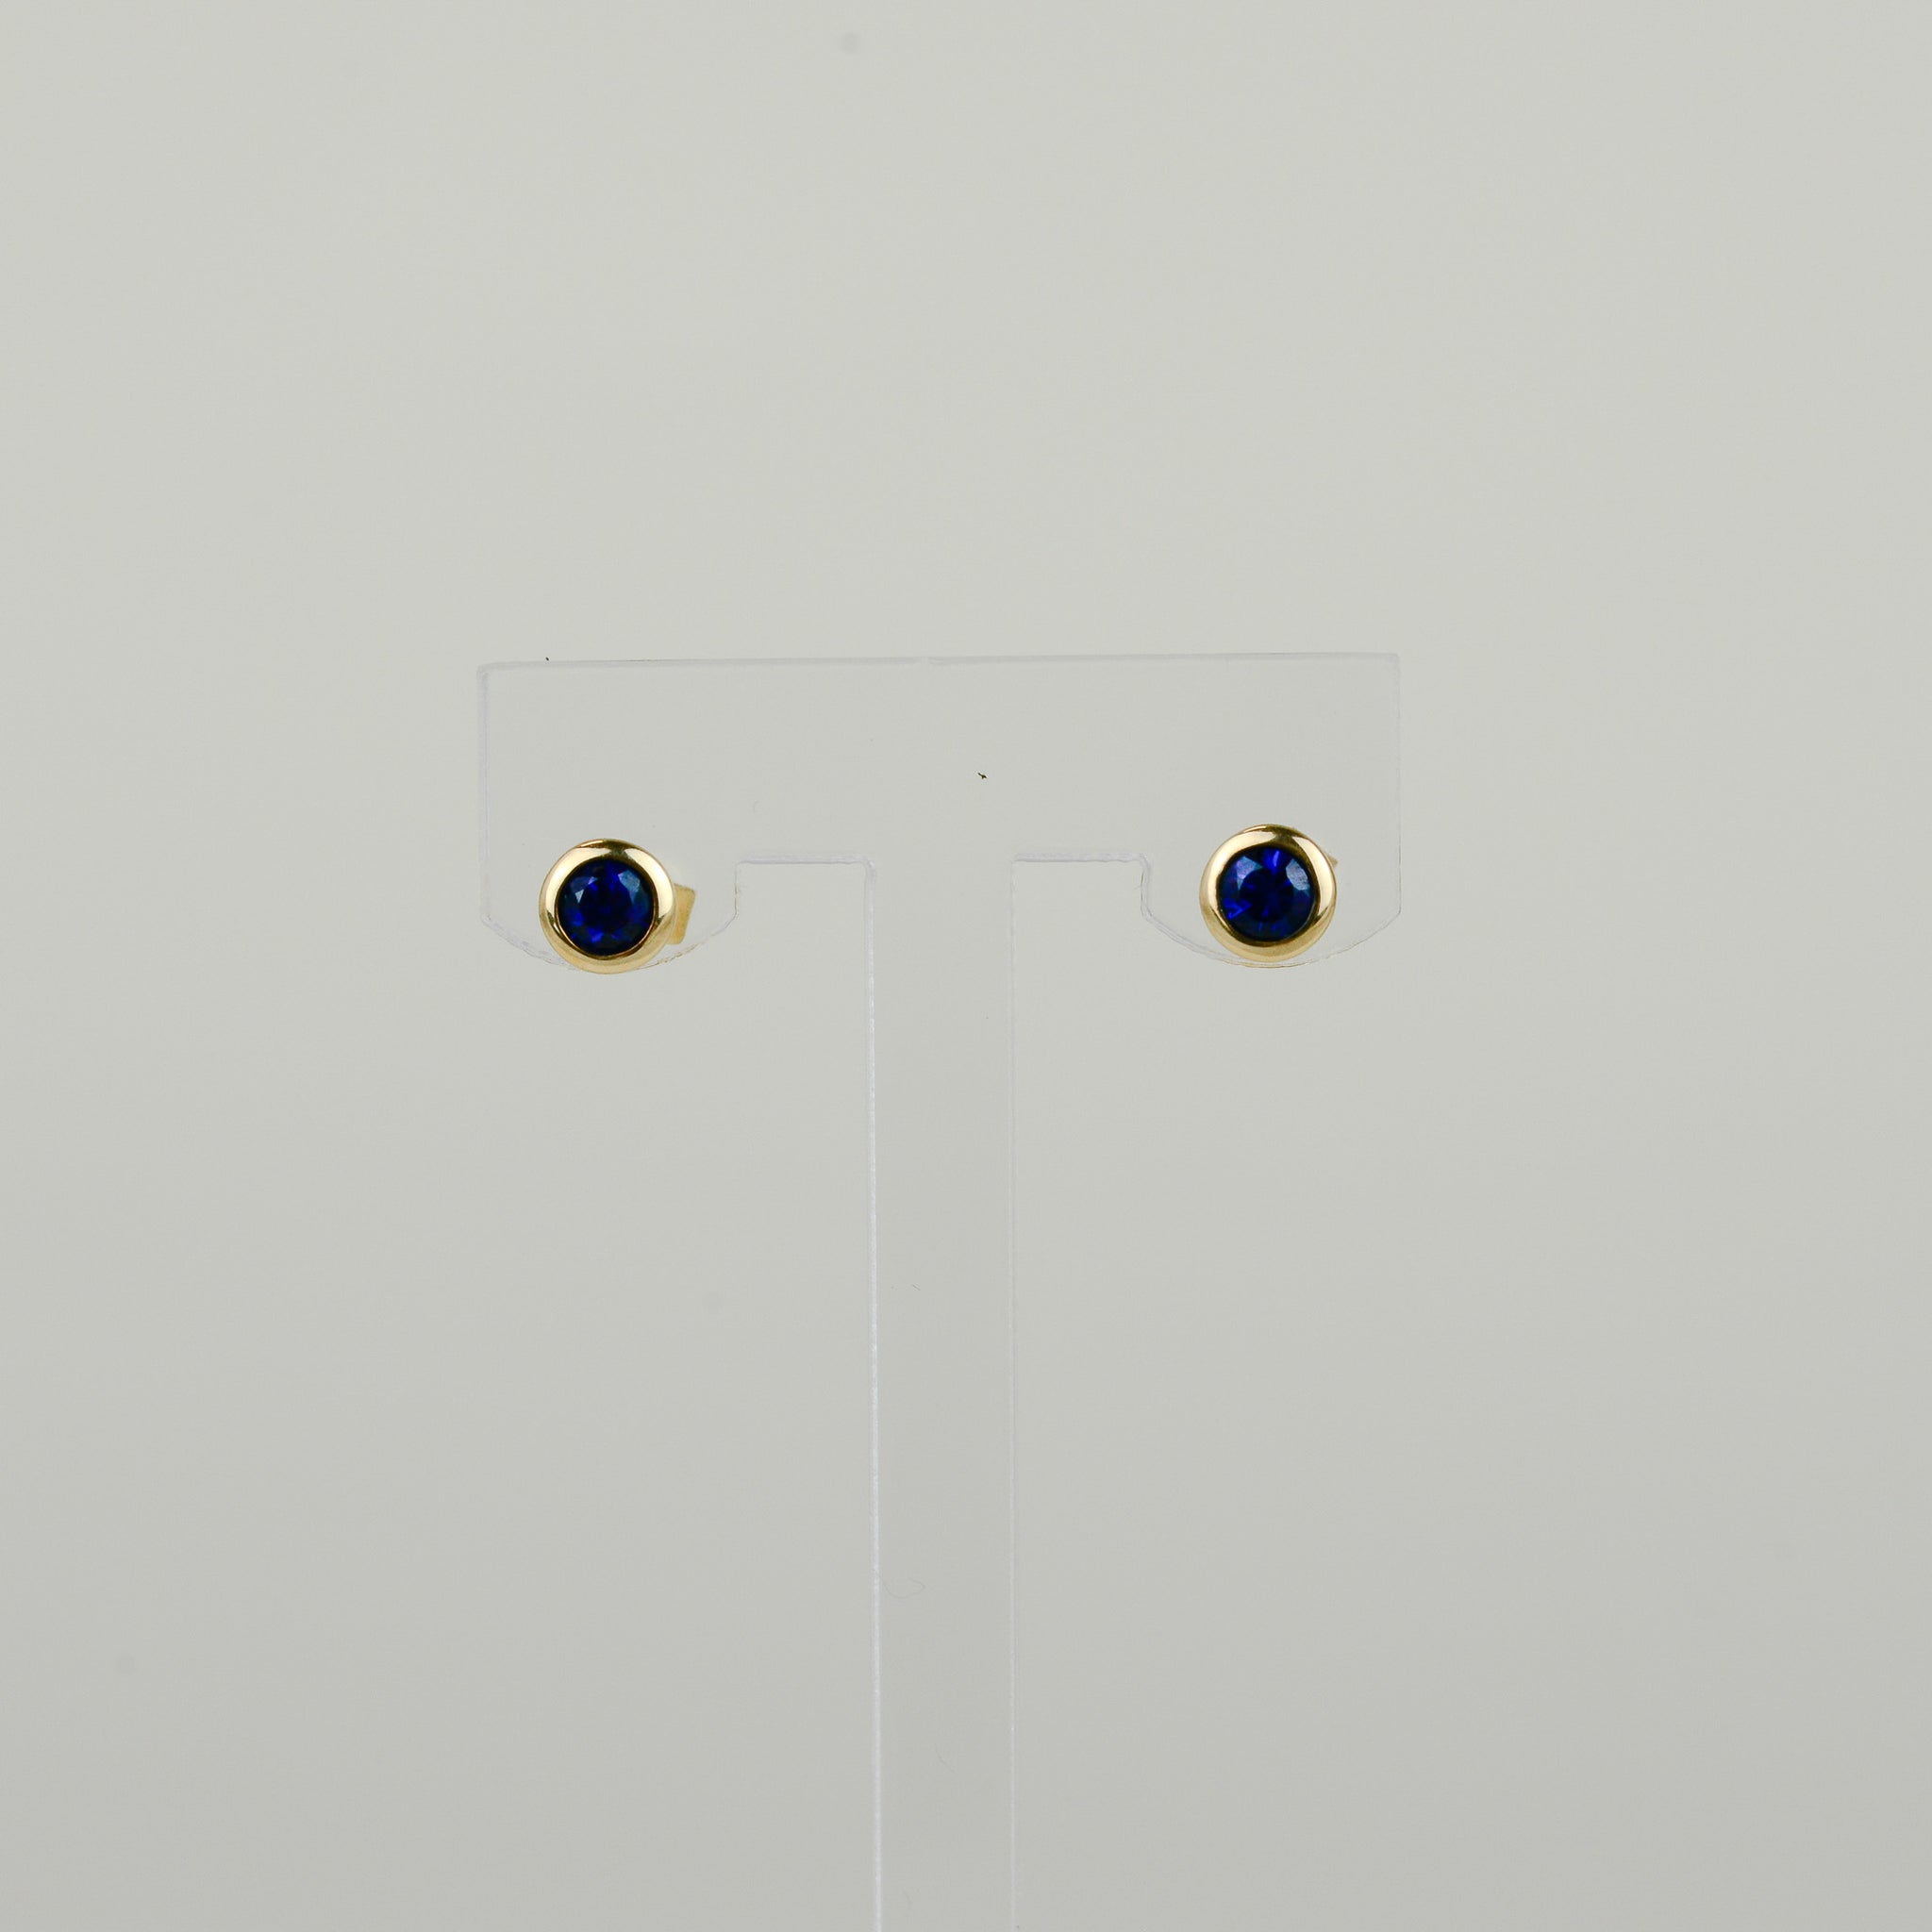 9ct Yellow Gold 0.31ct Round Sapphire Stud Earrings